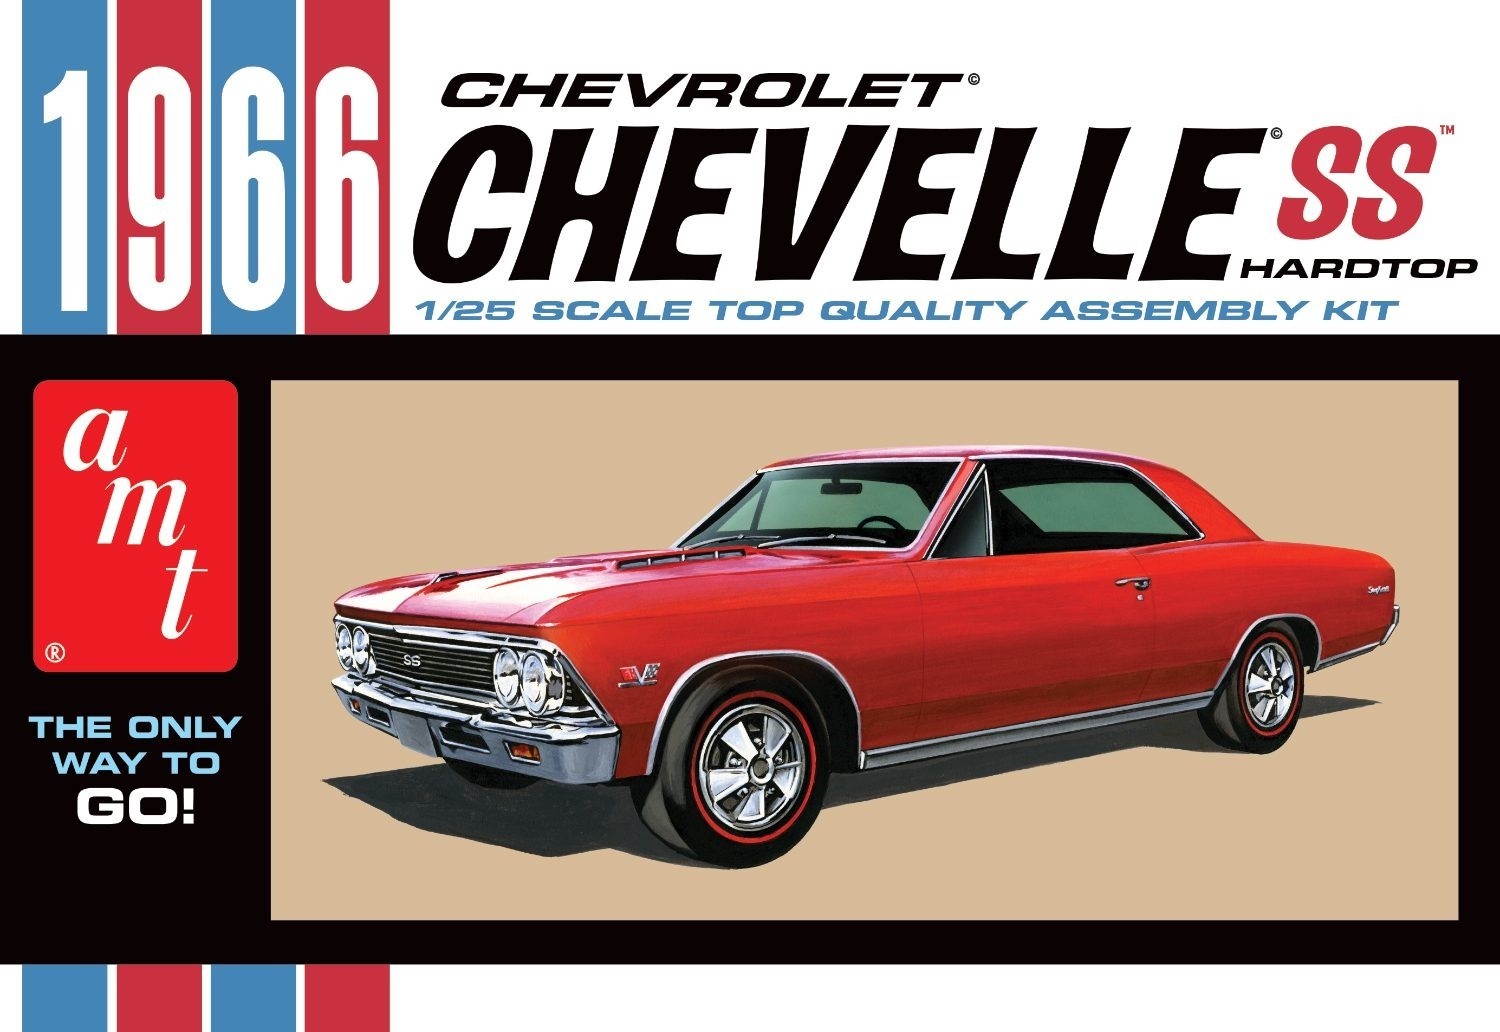 AMT 1342 CHEVY CHEVELLE SS 1966 1:25